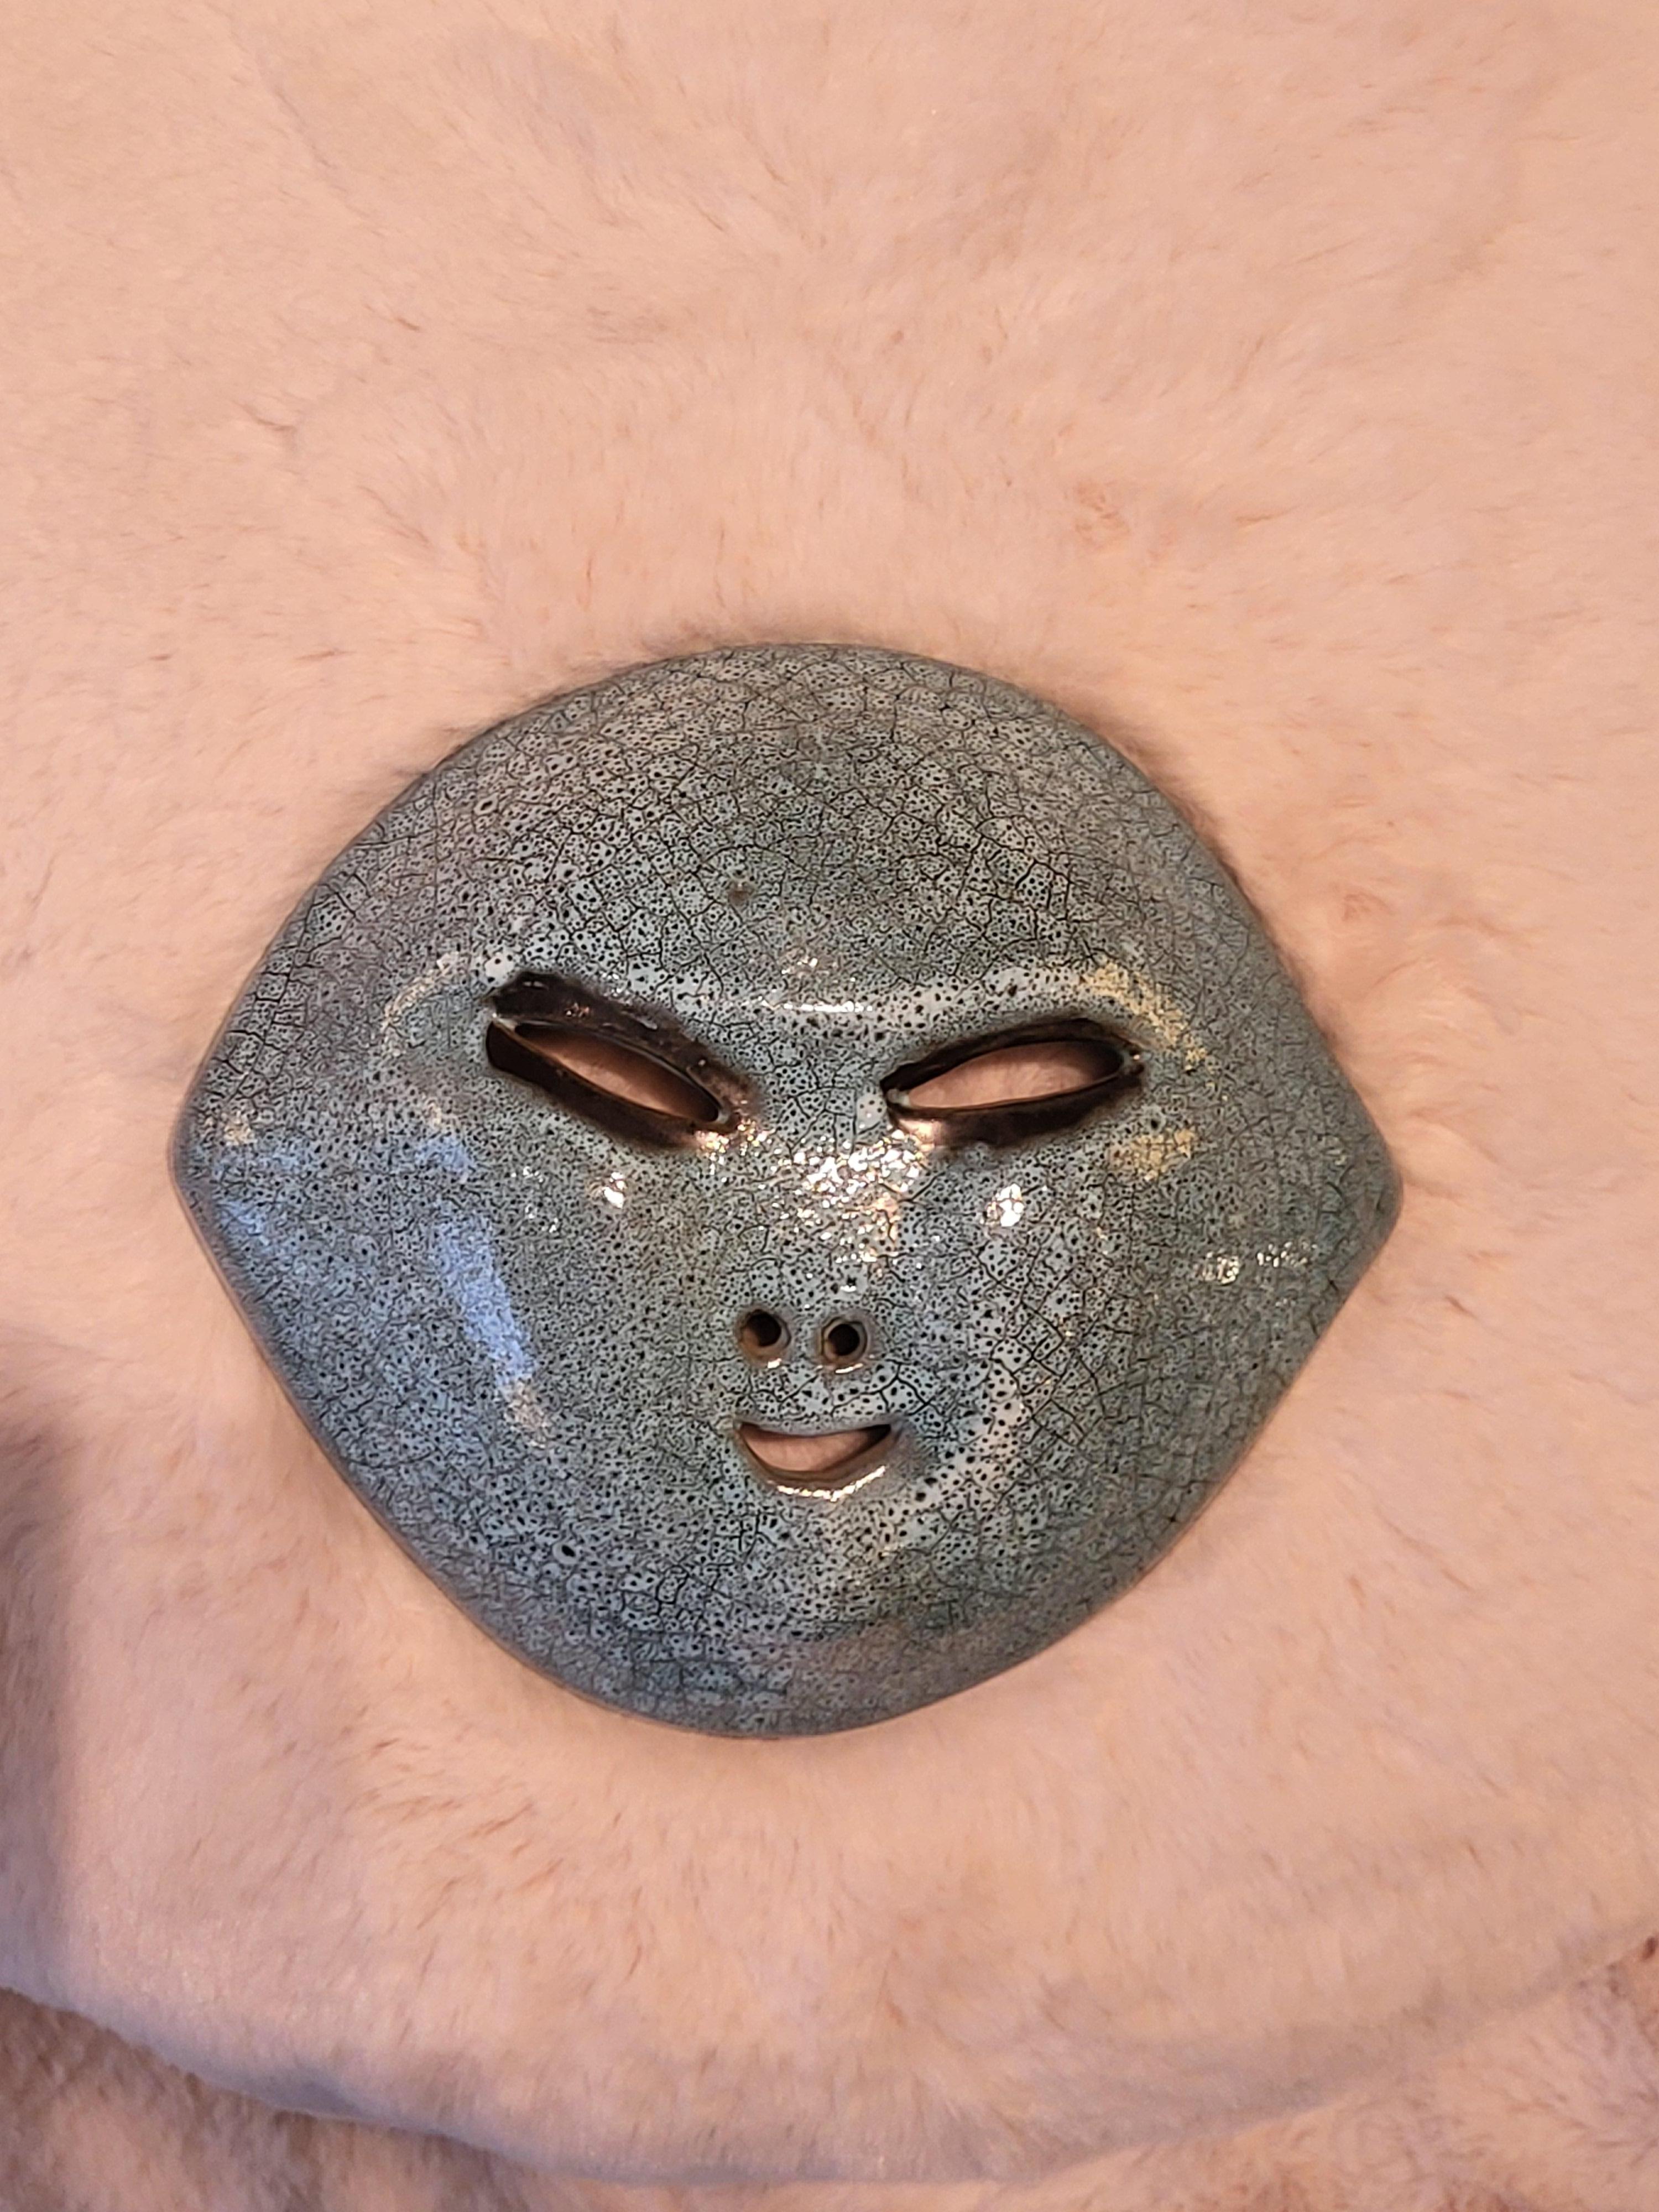 Mask by Accolay pottery, active between 1947 and 1983, signed